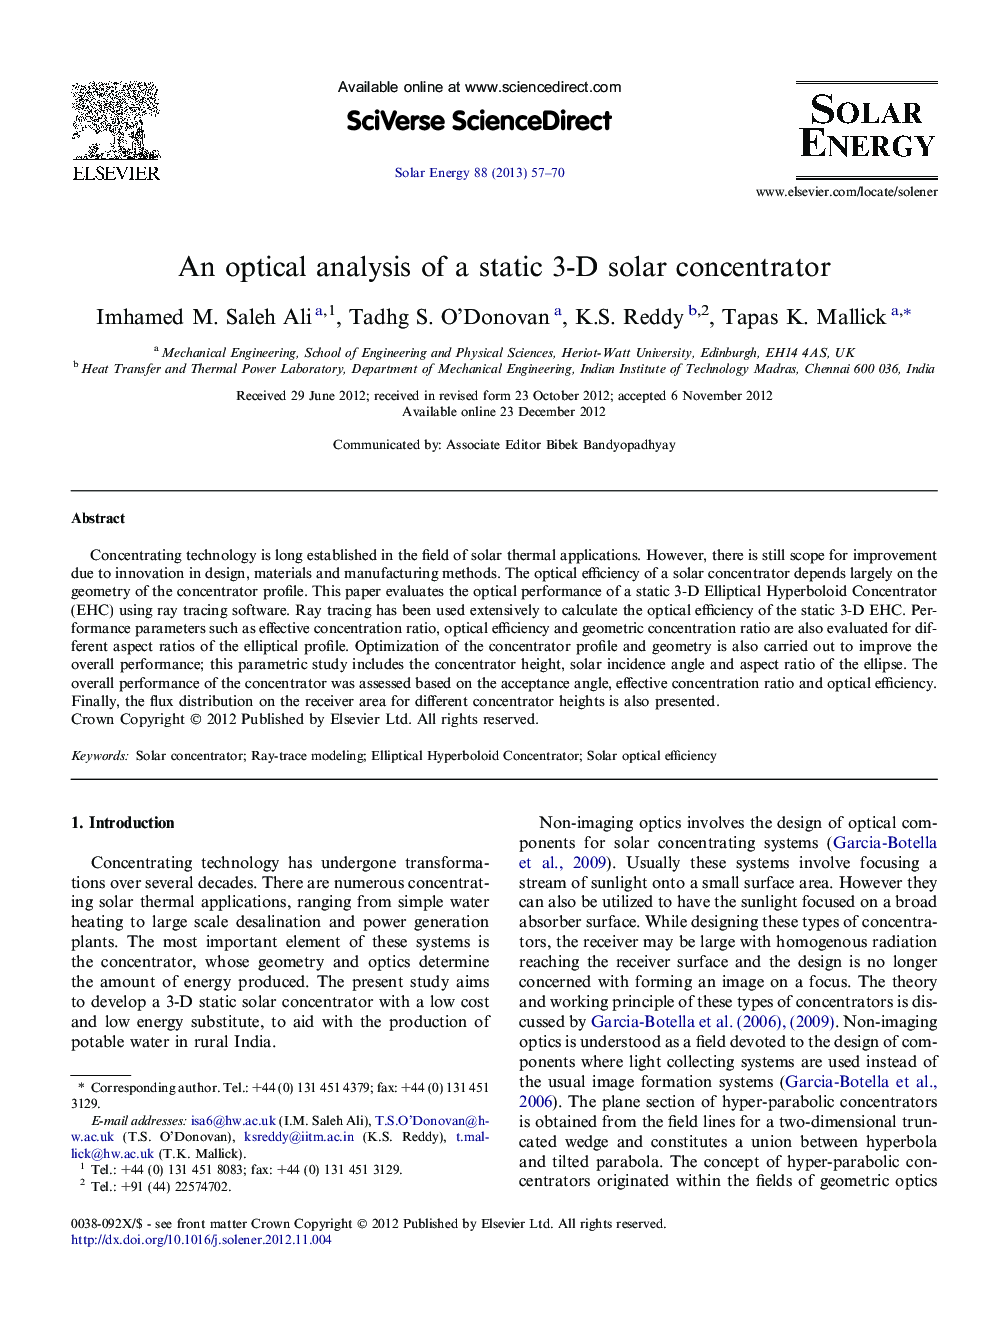 An optical analysis of a static 3-D solar concentrator